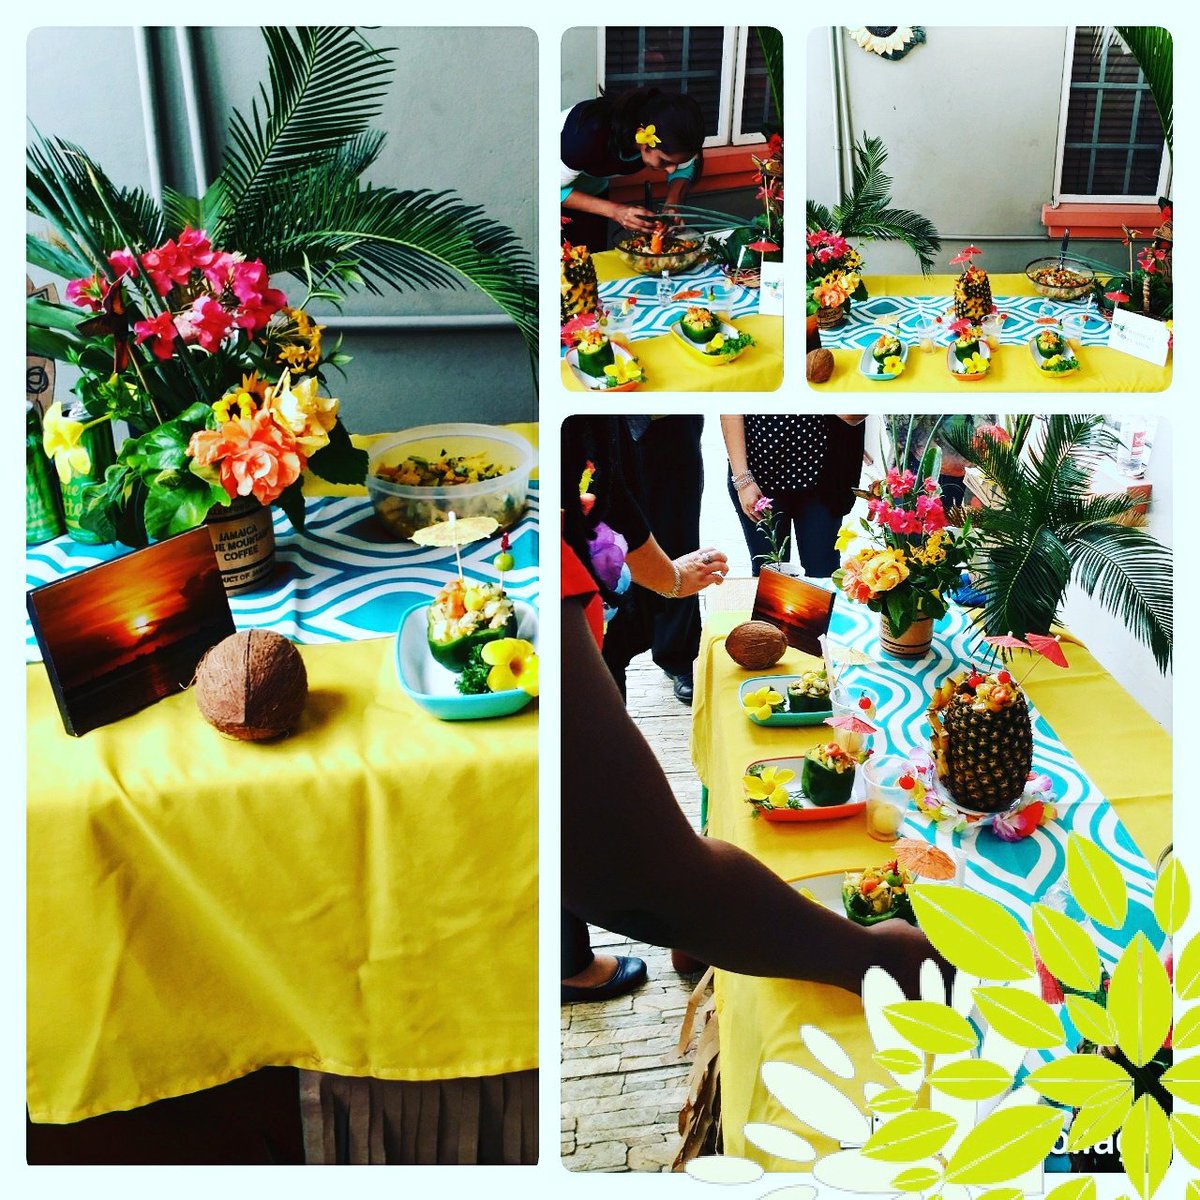 You can chow anything! Ask Aegis&Co #officecompetition #trinichow #Trinidad #Tobago #Aegistt #lifeatAegis